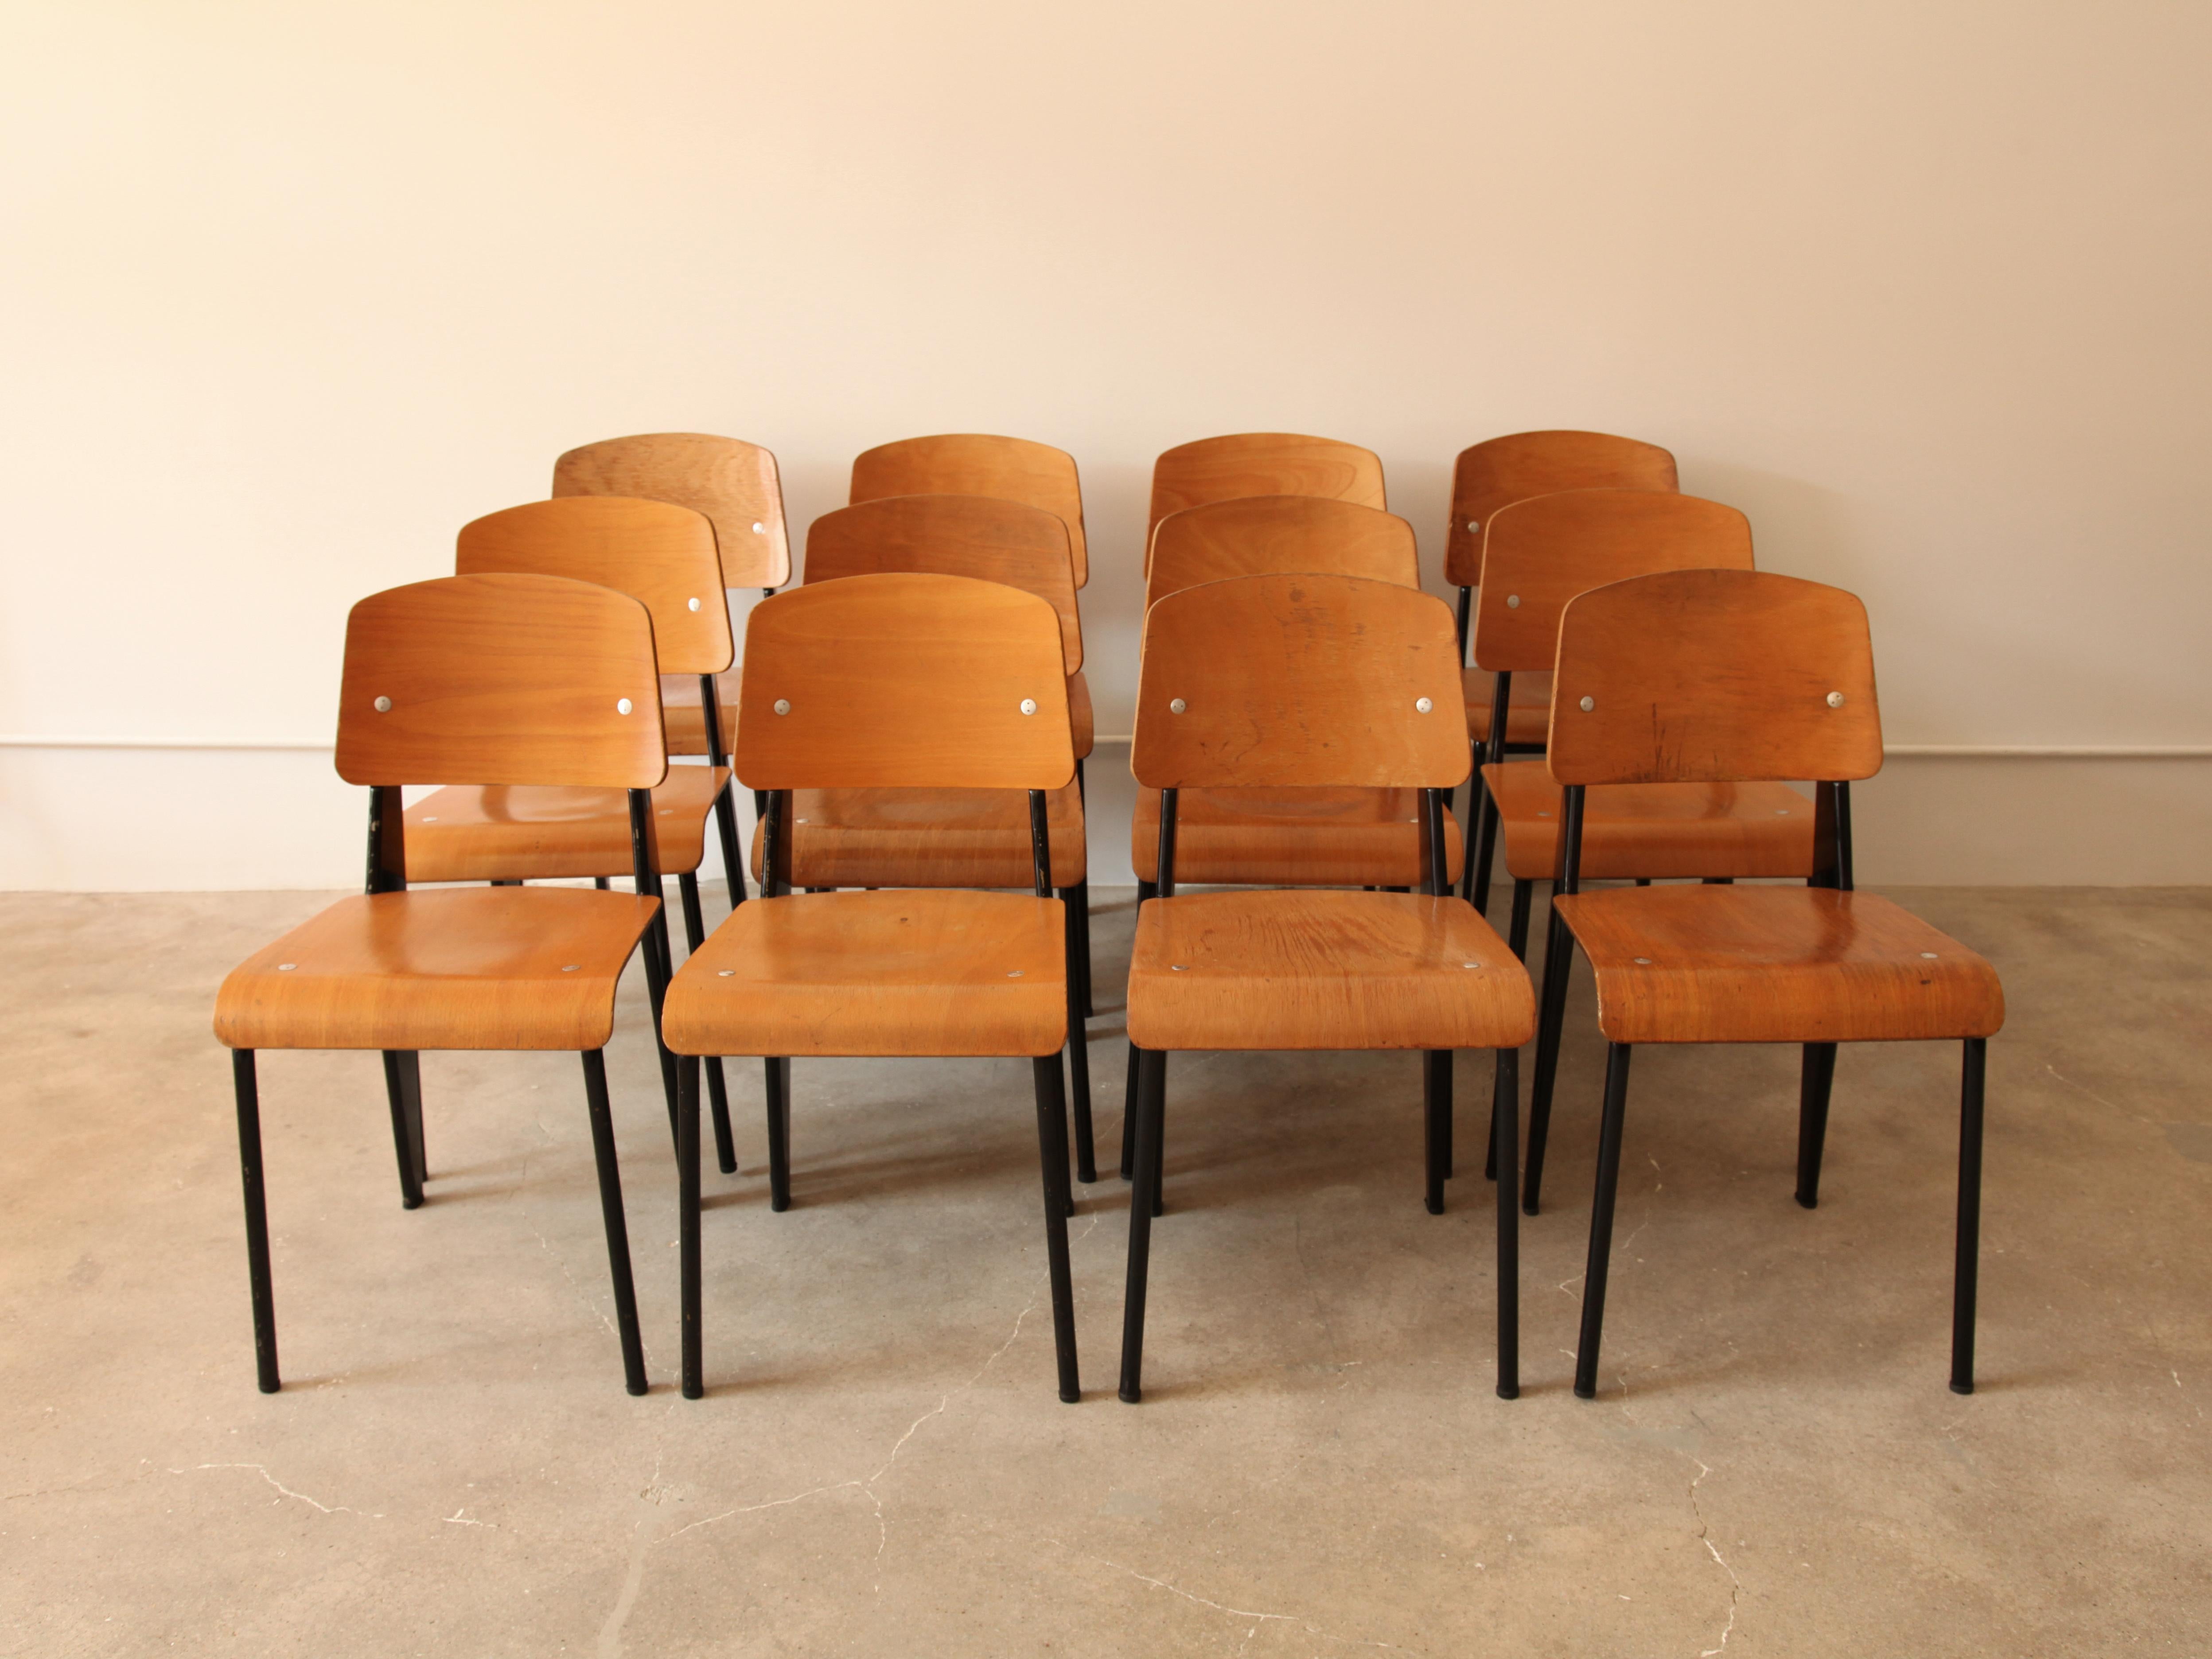 'Semi-Metal' No. 305 chairs by Jean Prouve, and manufactured by Ateliers Jean Prouvé, France, circa 1950. Enameled steel and beech plywood.  We currently have a set of 8 available. 

Price is per chair. 

Please contact for more info.

Ref: Jean